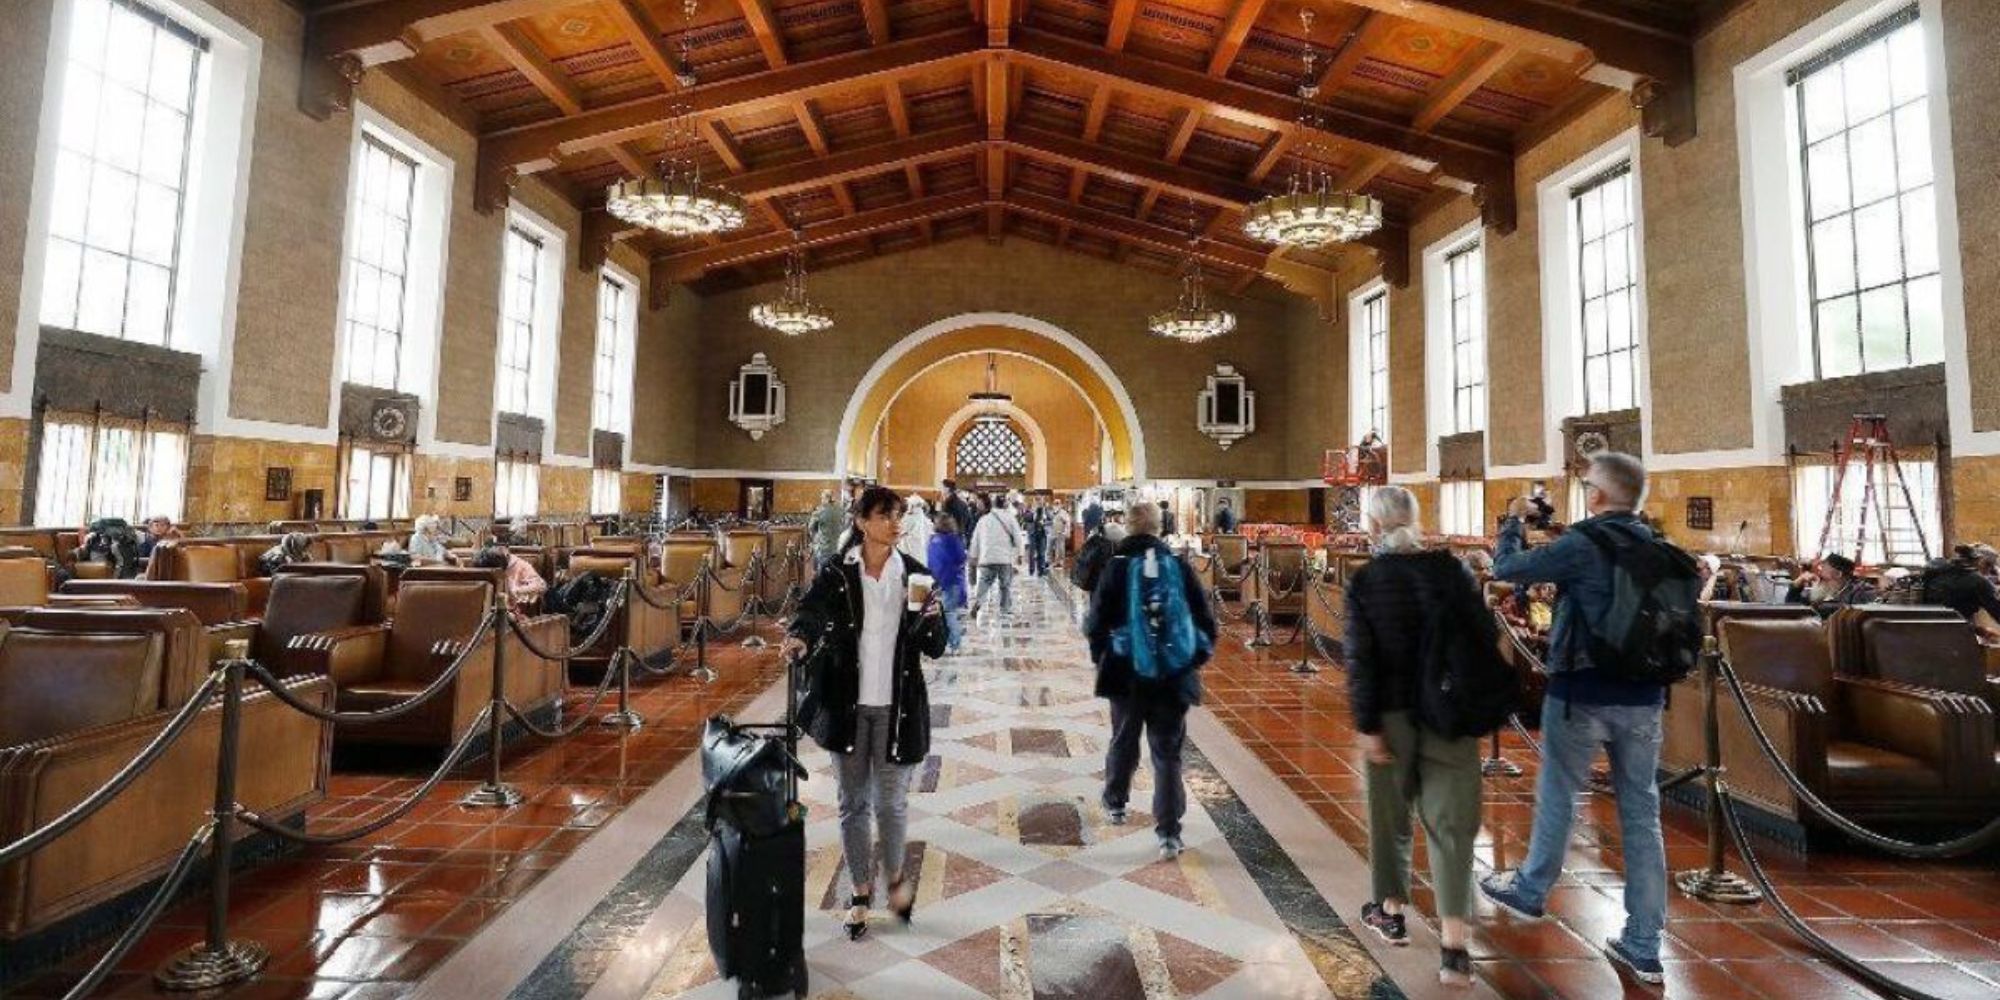 Union Station in Los Angeles